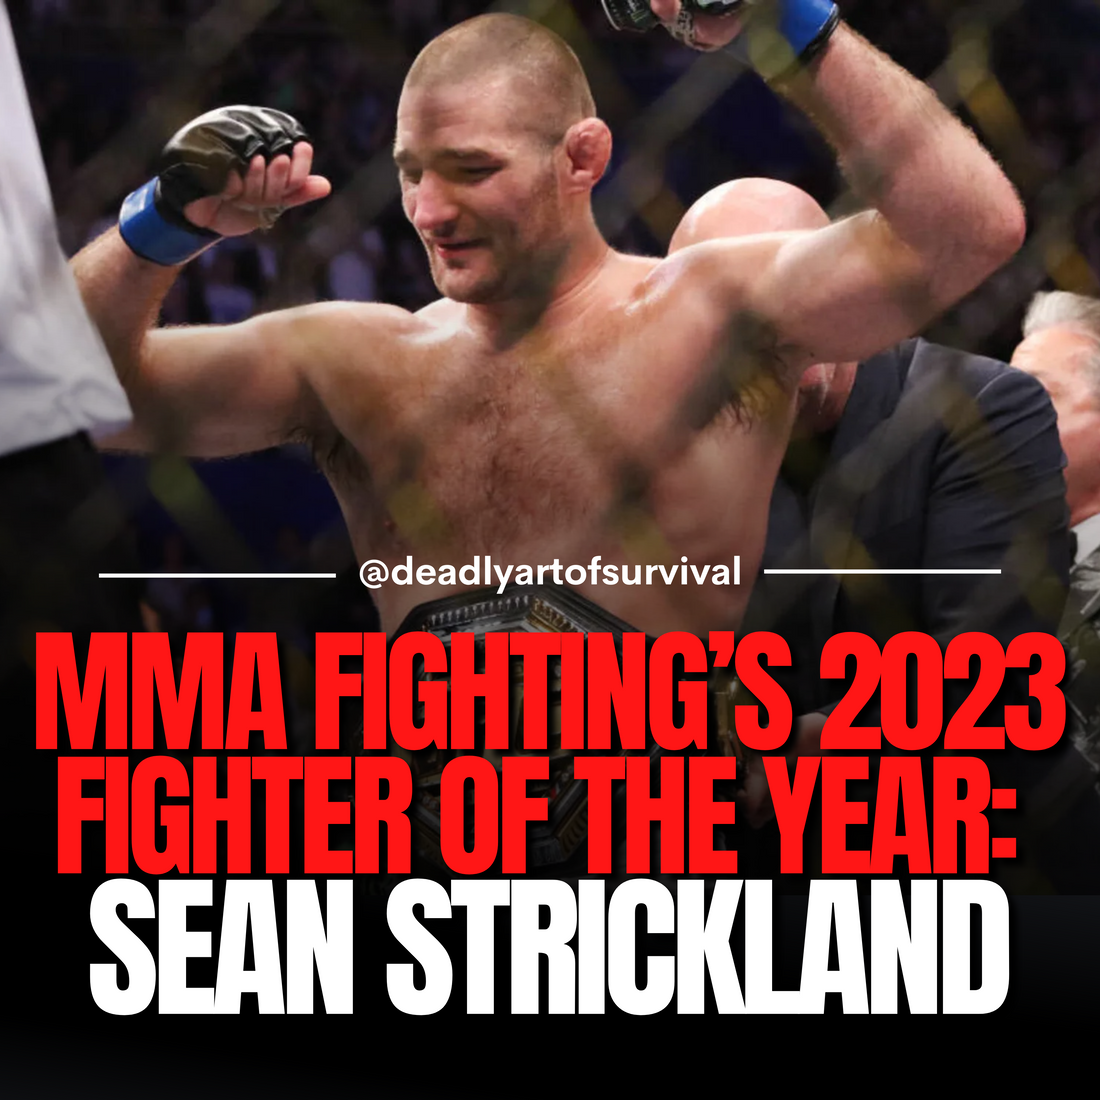 Sean-Strickland-Defies-Odds-Crowned-MMA-Fighting-s-2023-Fighter-of-the-Year deadlyartofsurvival.com